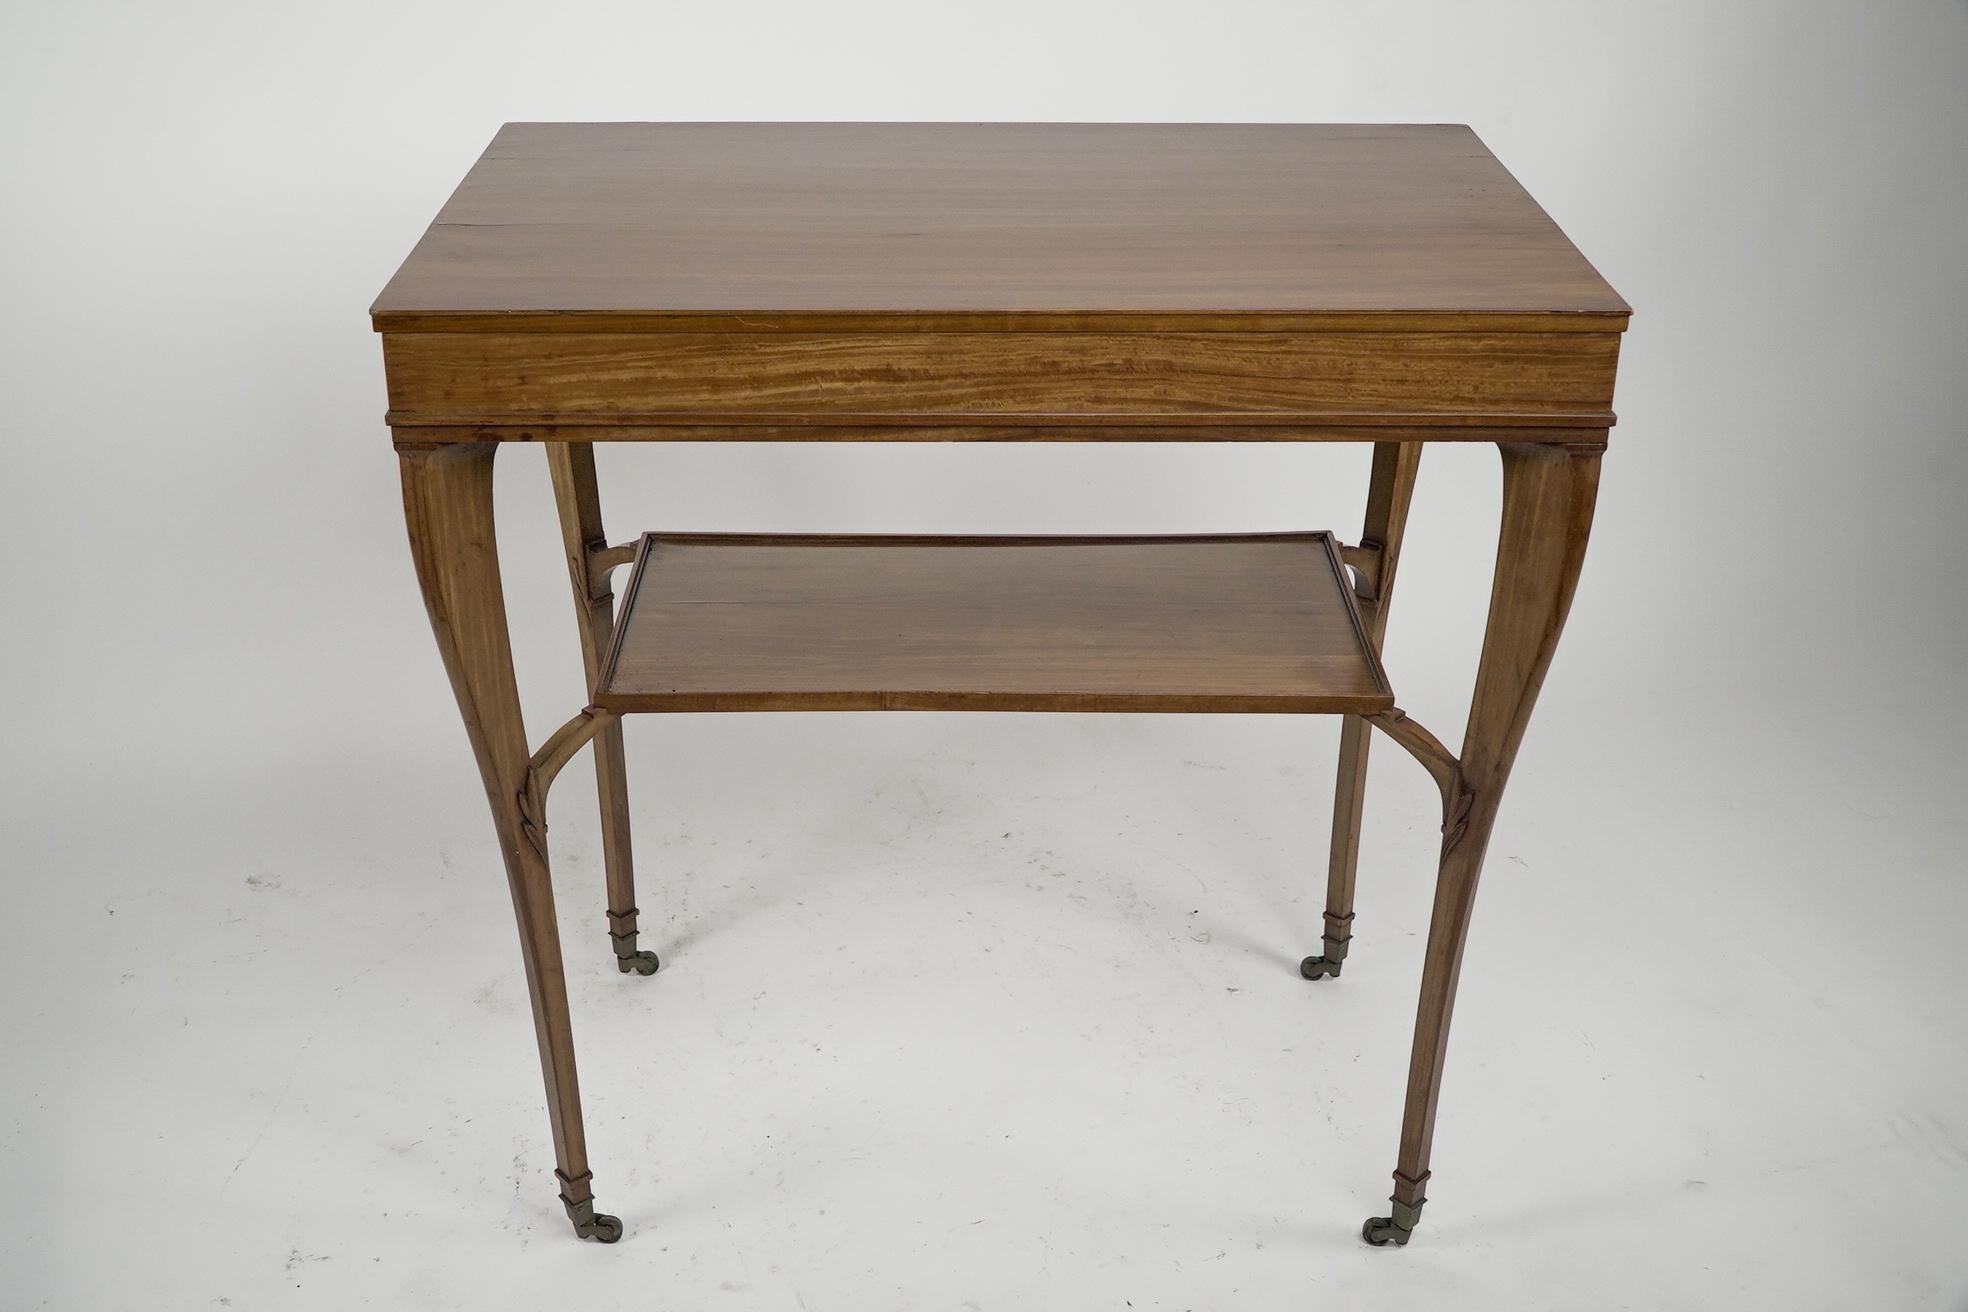 Arthur Heygate Mackmurdo (1851-1942). Made by E. Goodall and Company. A rare early Art Nouveau Satinwood side table made for Pownall Hall, Cheshire.
Mackmurdo''s influence in Europe is recognised as having produced the earliest examples of Art